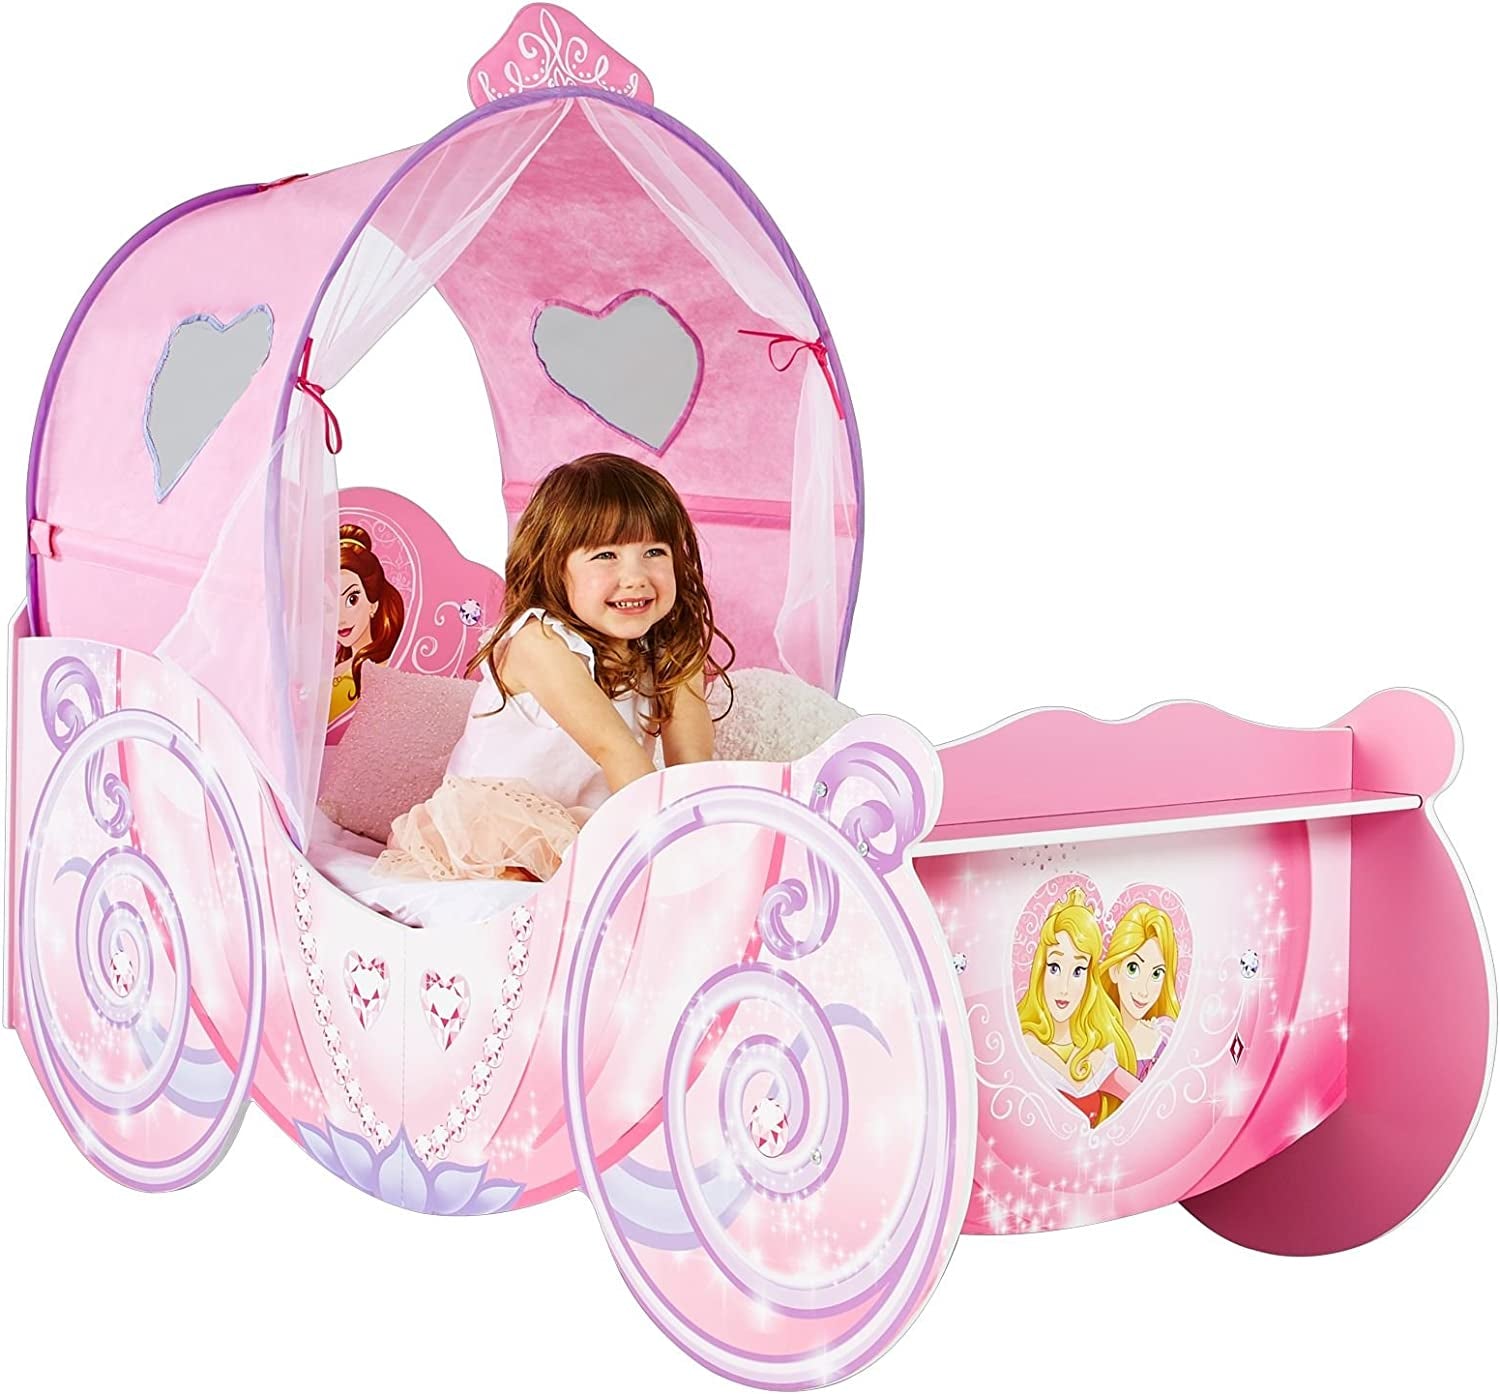 452DNY Princess Carriage Kids Toddler Bed by Hellohome, Pink, 160X87.5X136 Cm